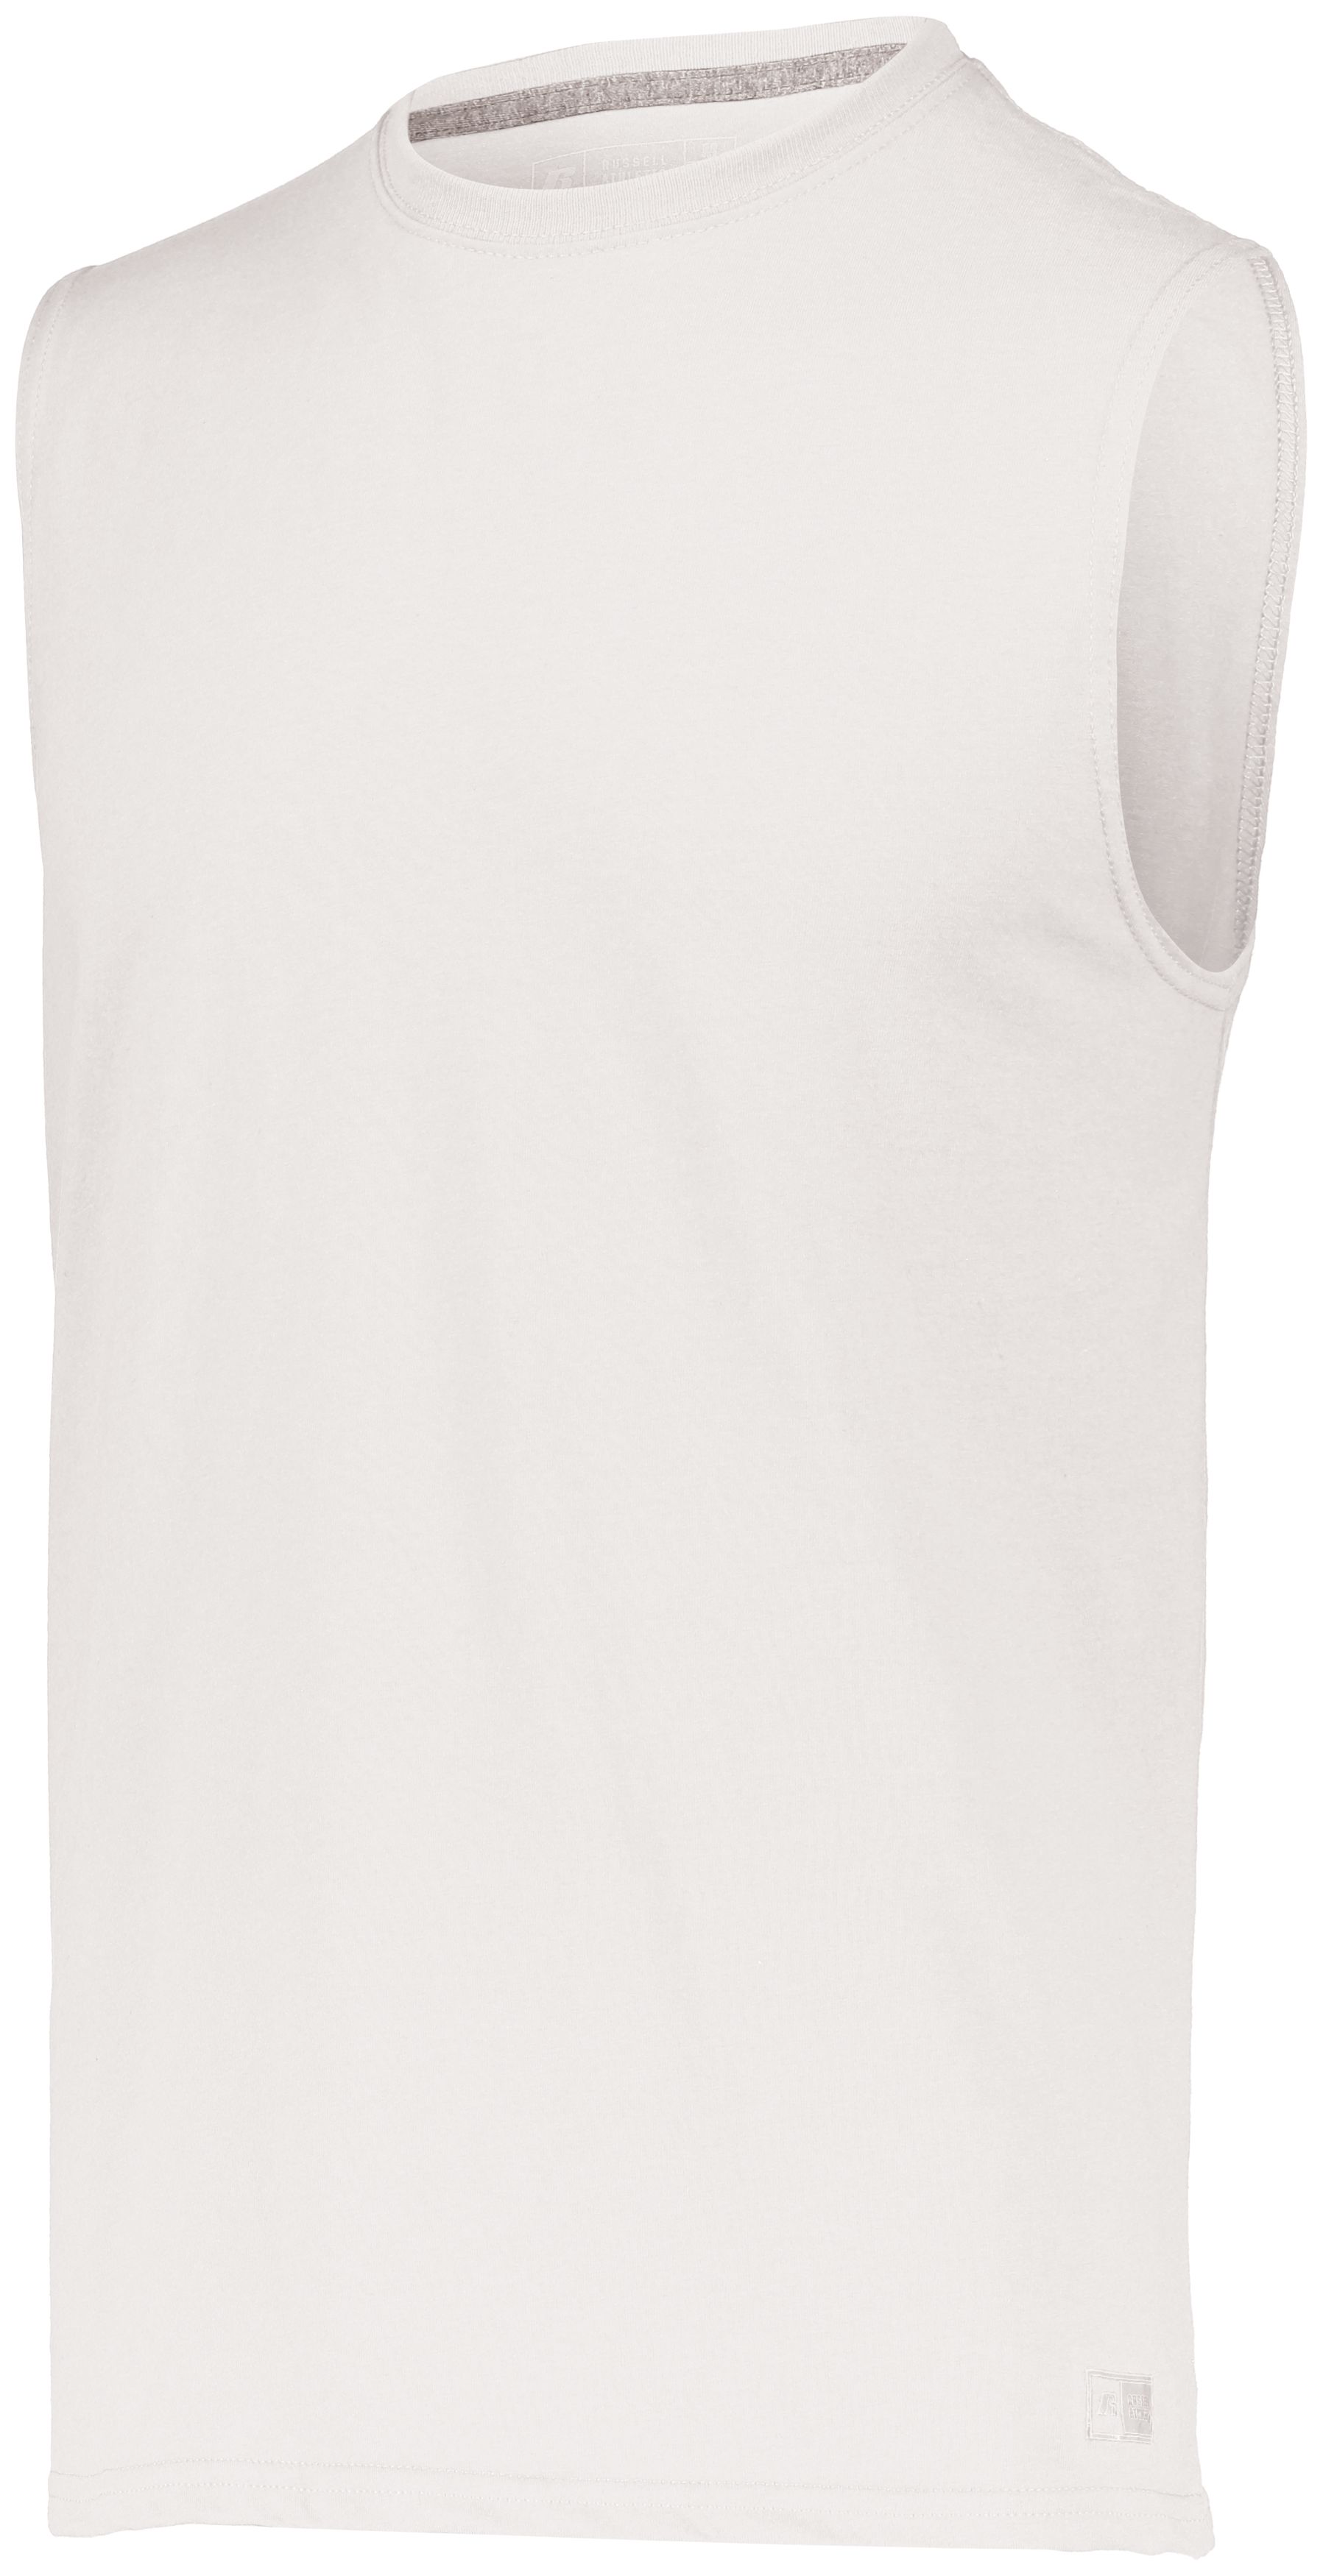 Russell Athletic 64MTTM - Essential Muscle Tee